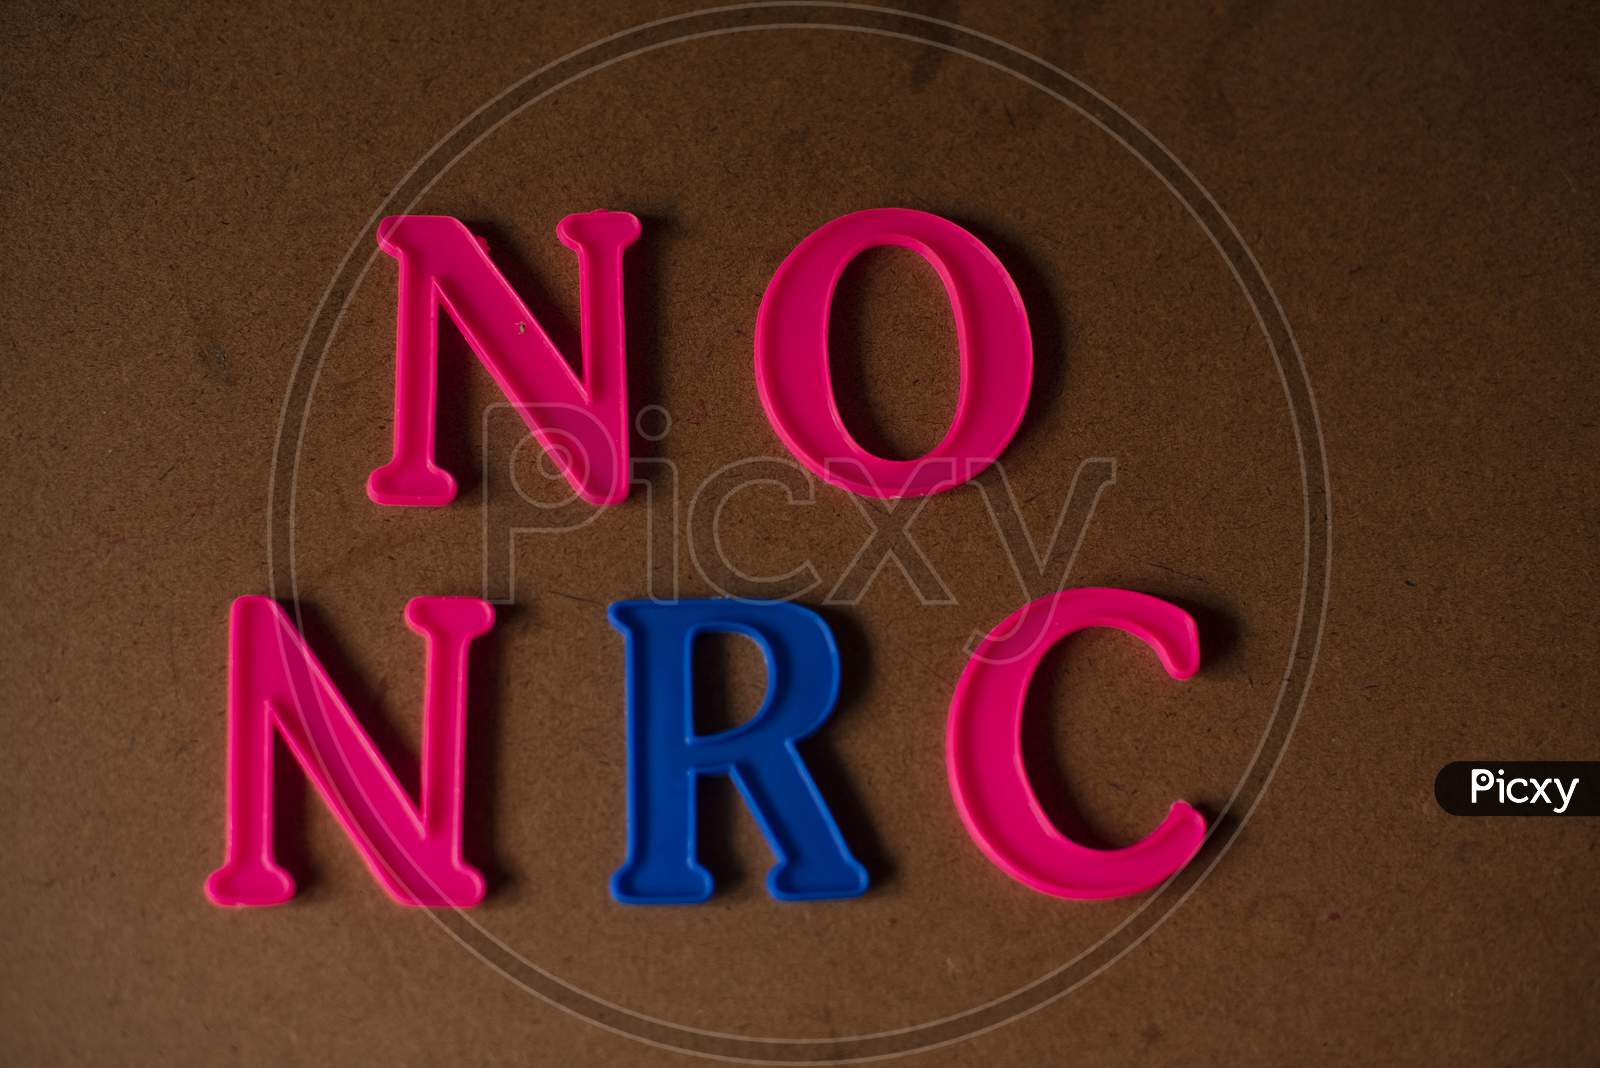 'NO NRC' written on a brown wooden background with lines of shadow.